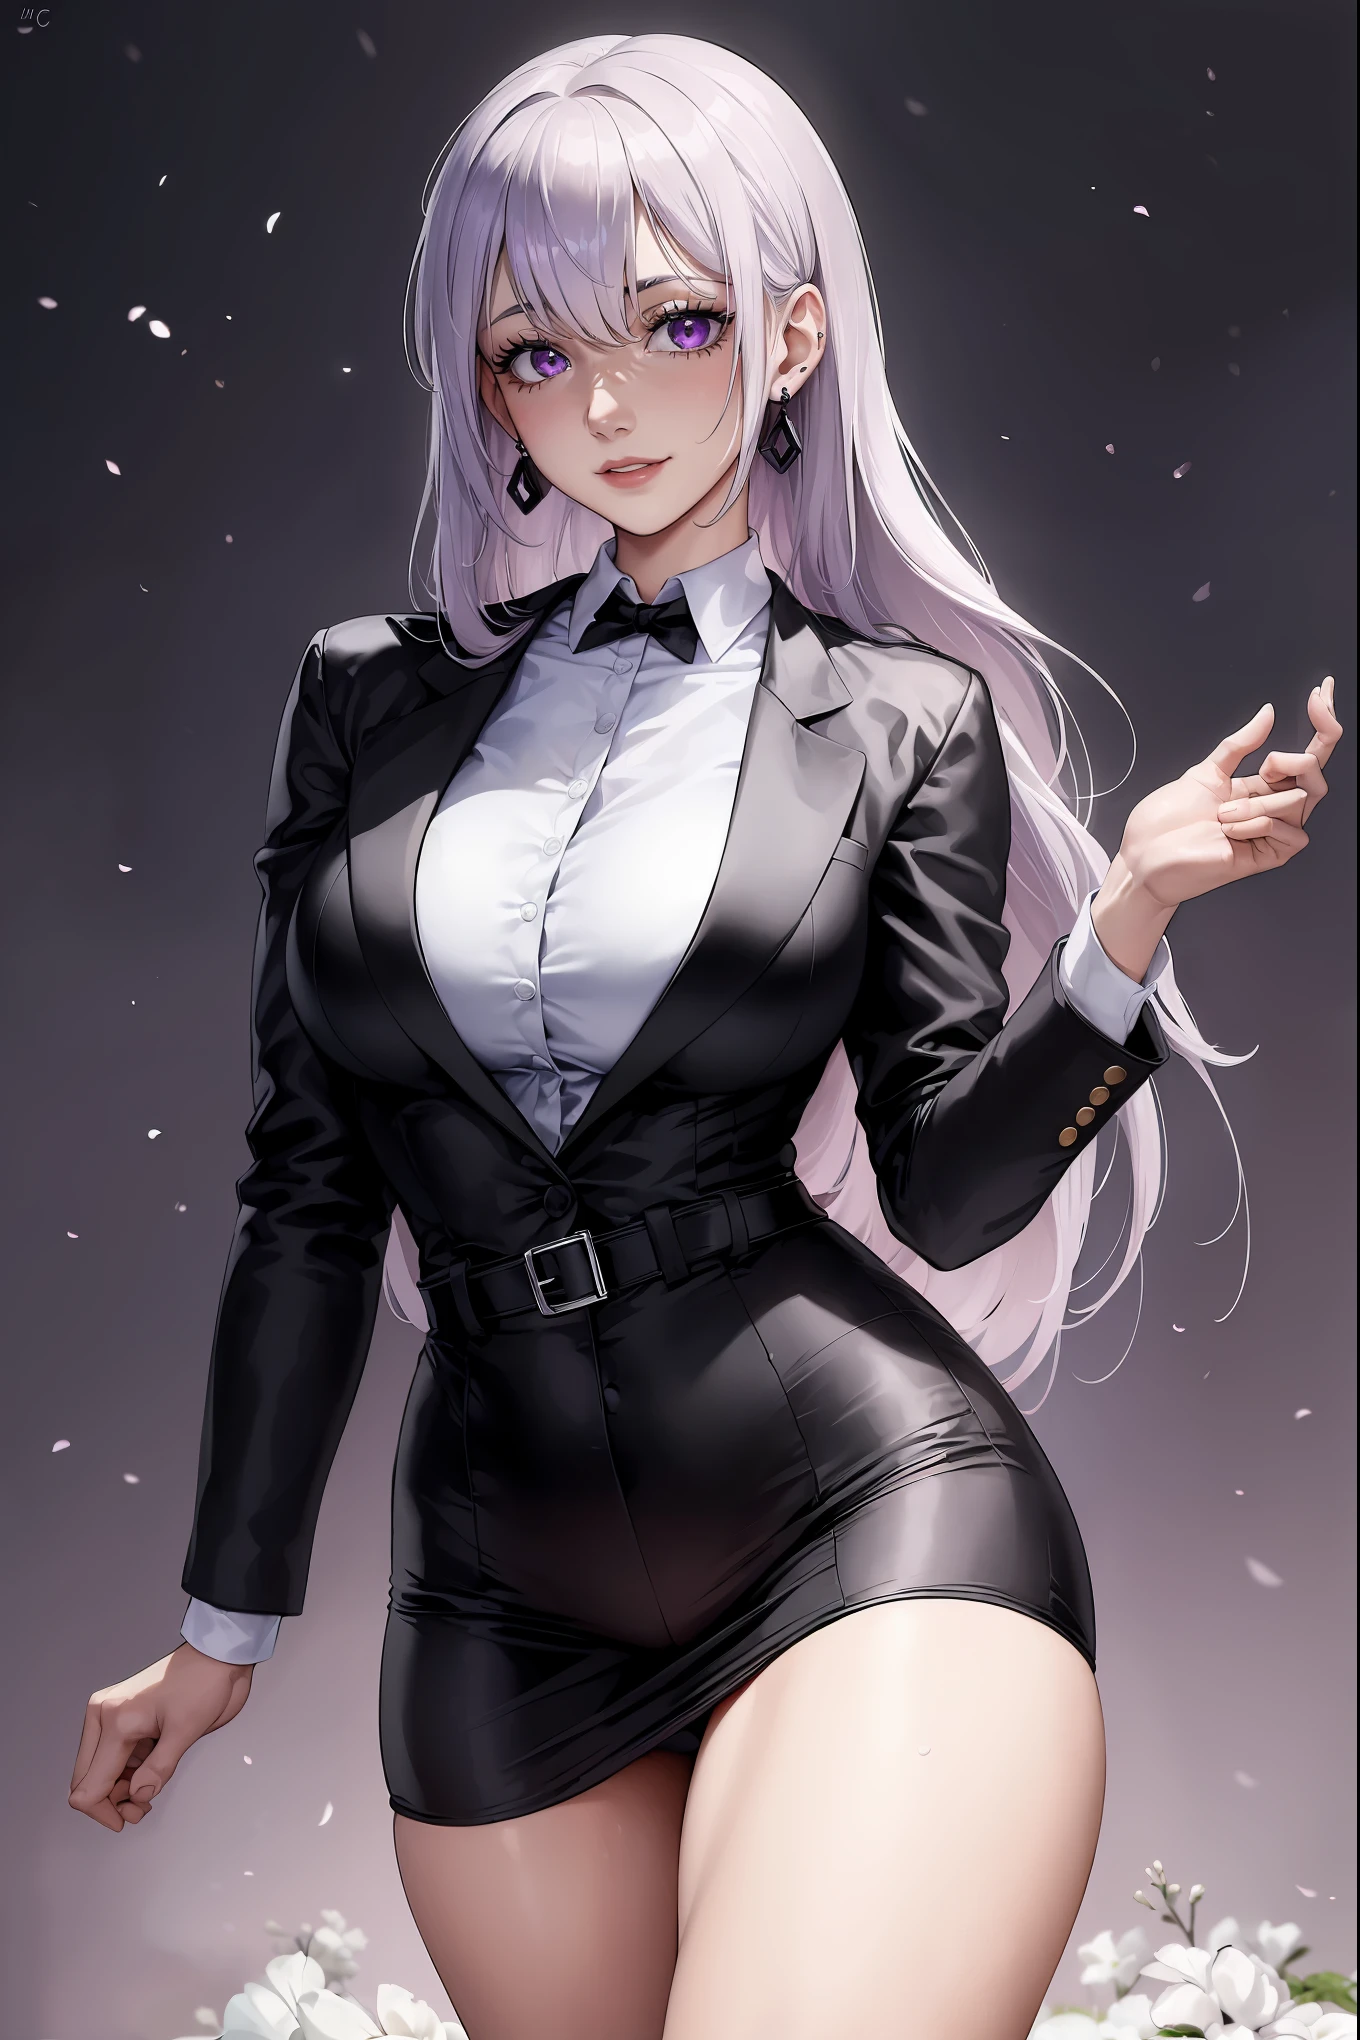 (1girl:1.5),(Best quality,4K,8K,A high resolution,tmasterpiece:1.2),ultra - detailed,(actual,photoactual,photo-actual:1.37),bekat,sliver long hair,girl with Redlip,girl in suit jacket,girl in elegant clothing,Redlip,Perfect application for lipstick,(beautidful eyes:1.4),(white shirt:1.5),silber hair,a purple eye,light smile,Happy expression,highlydetailed skin,Stunning face,Long eyelashes,black eyeliner,a work of art,(Black belt:1.2),white shirt,Dangle earrings,(regular suit:1.2),Full body lesbian